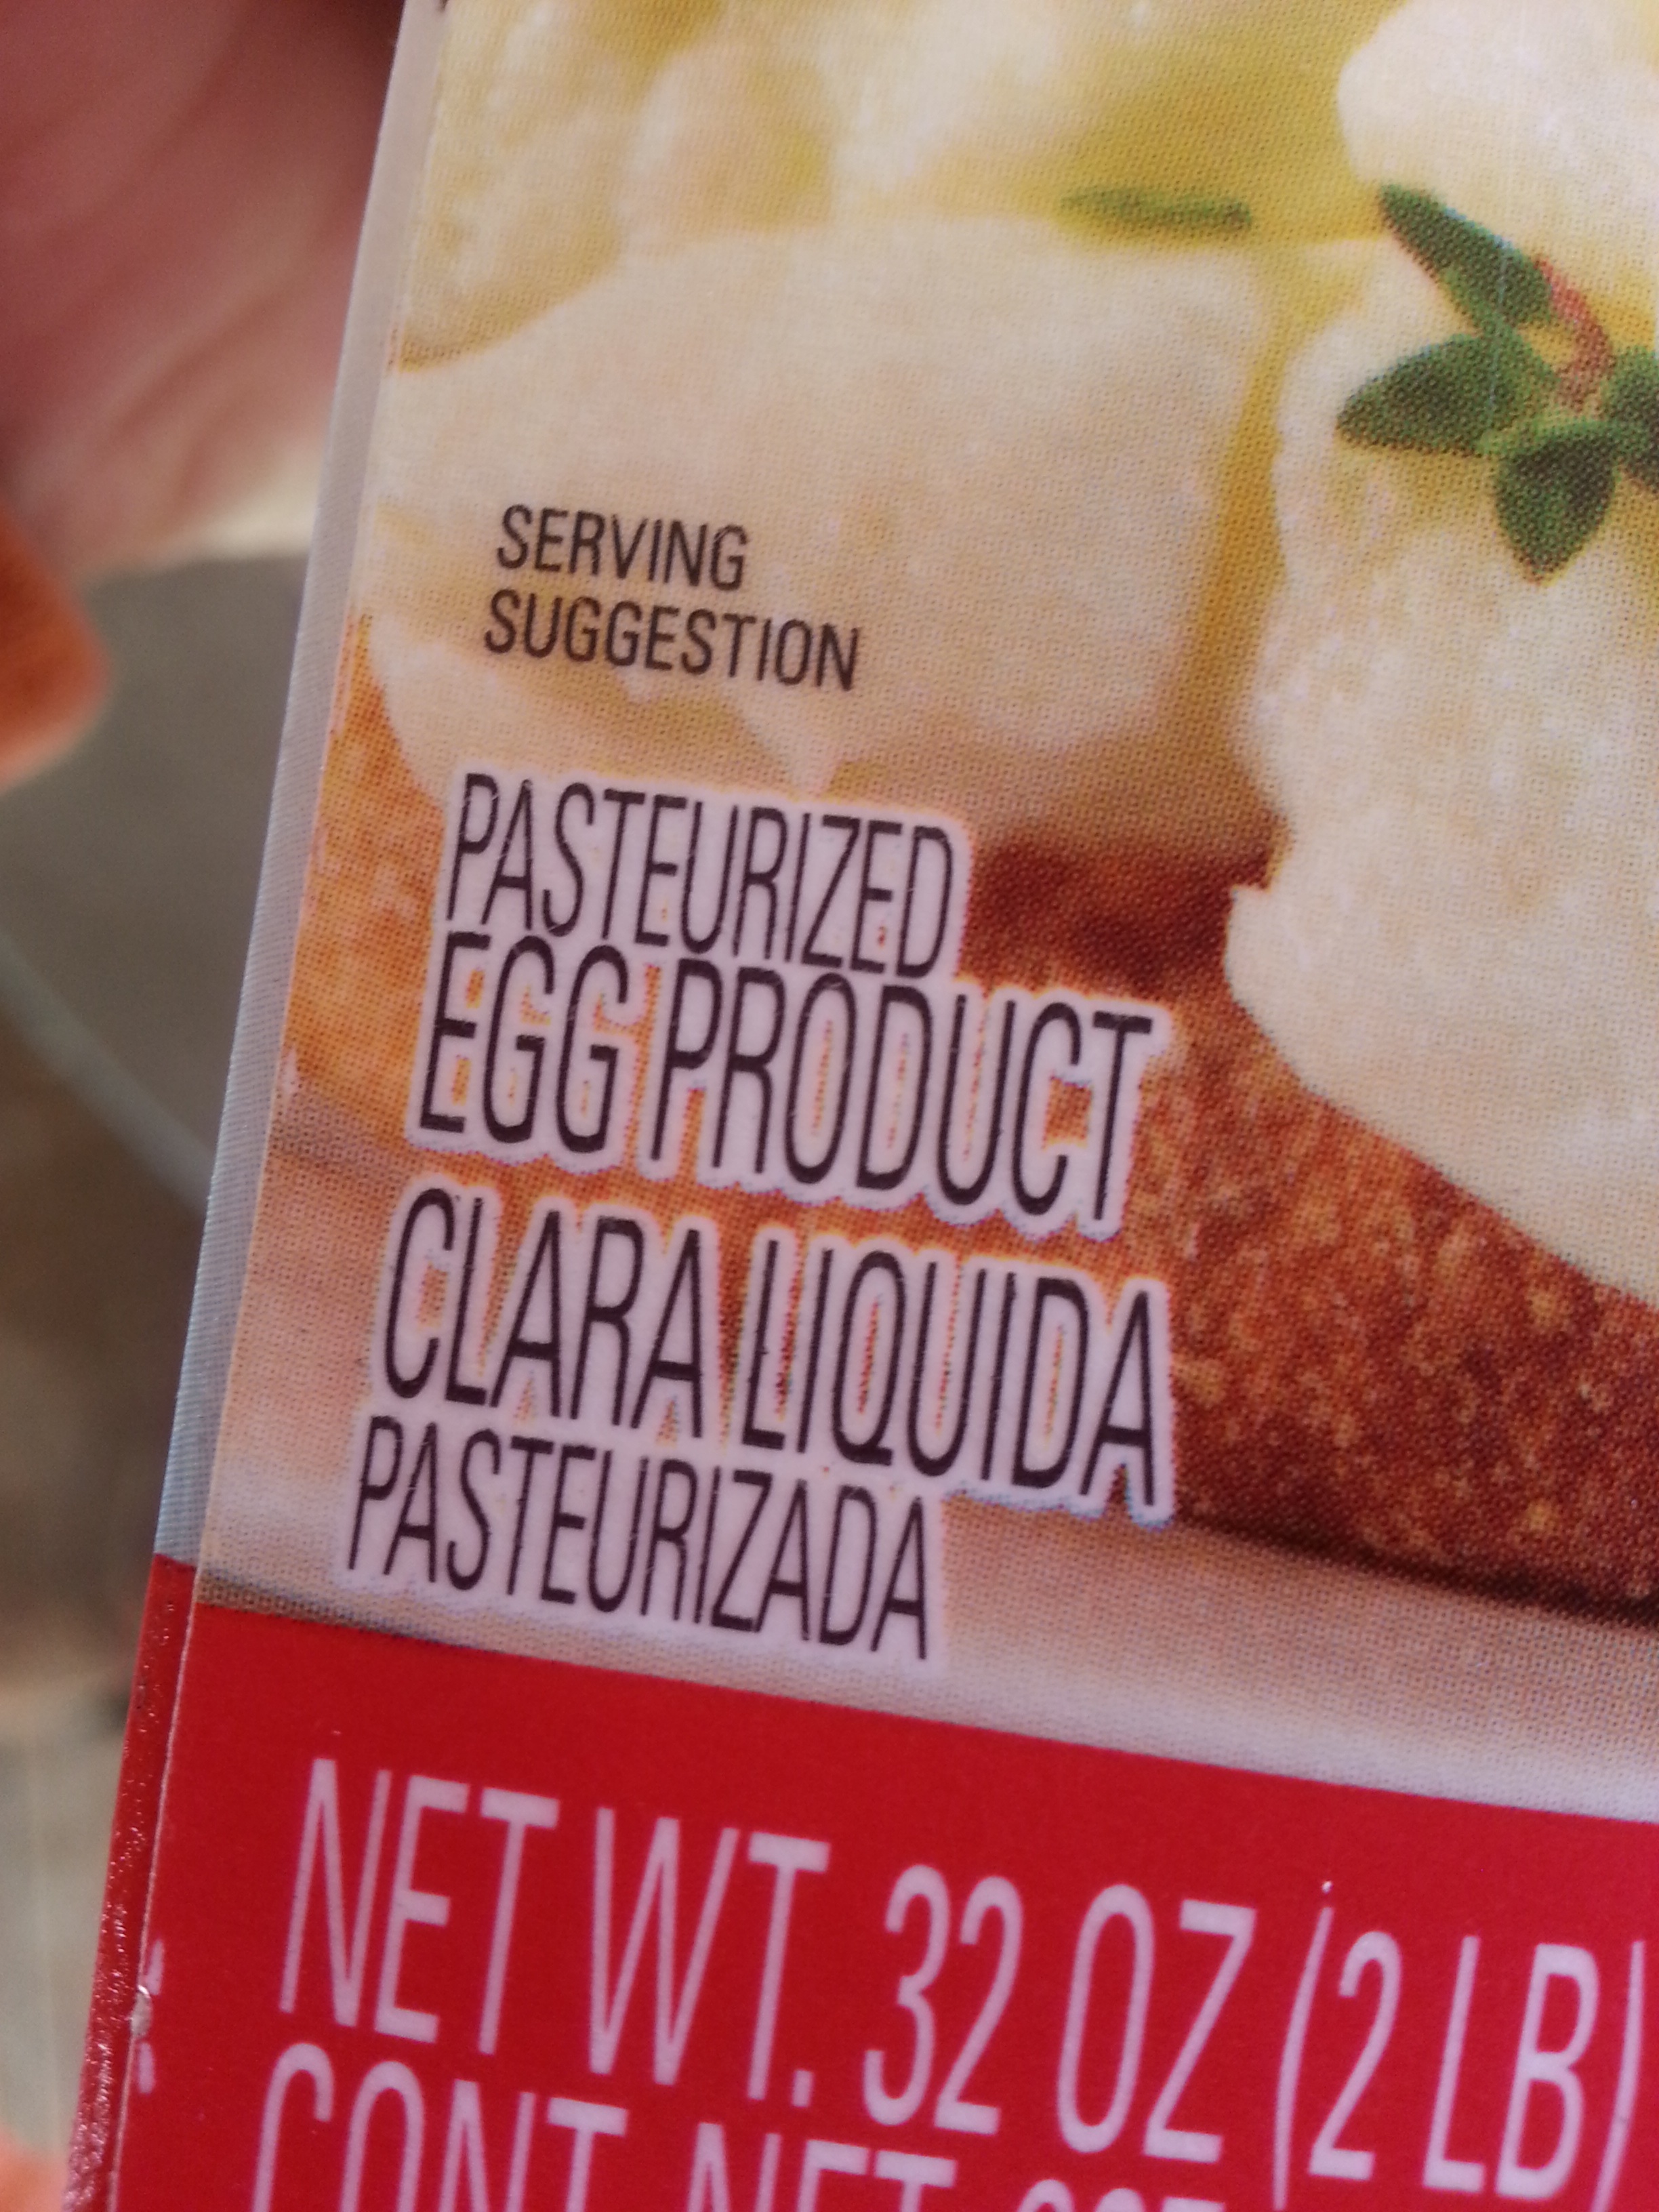 Is it pasteurized?